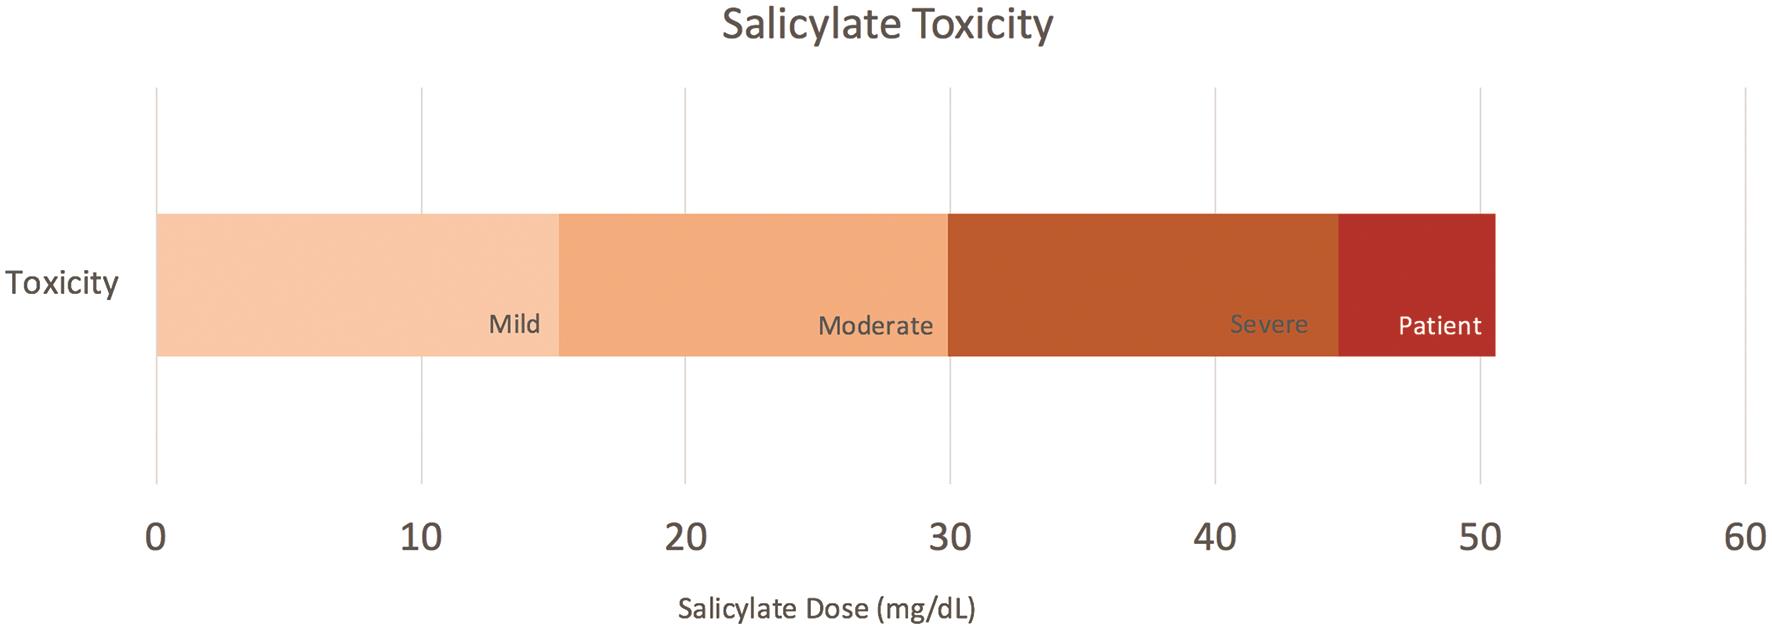 Visual representation of salicylate toxicity doses and the salicylate dose of the patient reported.